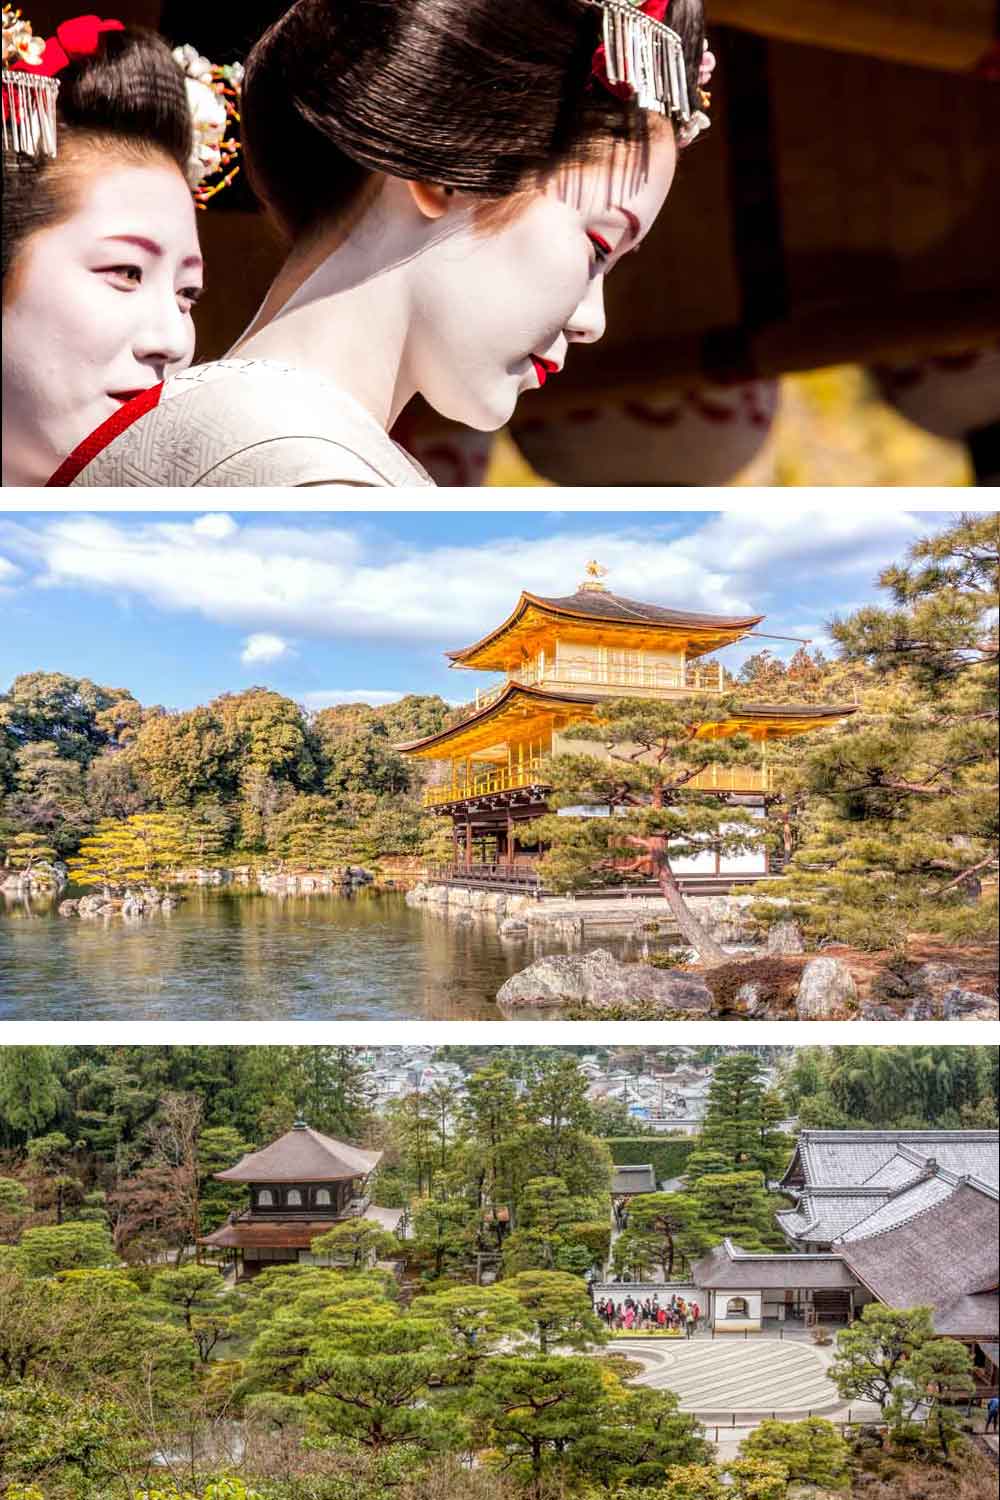 Things to do in Kyoto: Maiko, Golden Pavilion, View over Ginkakuji